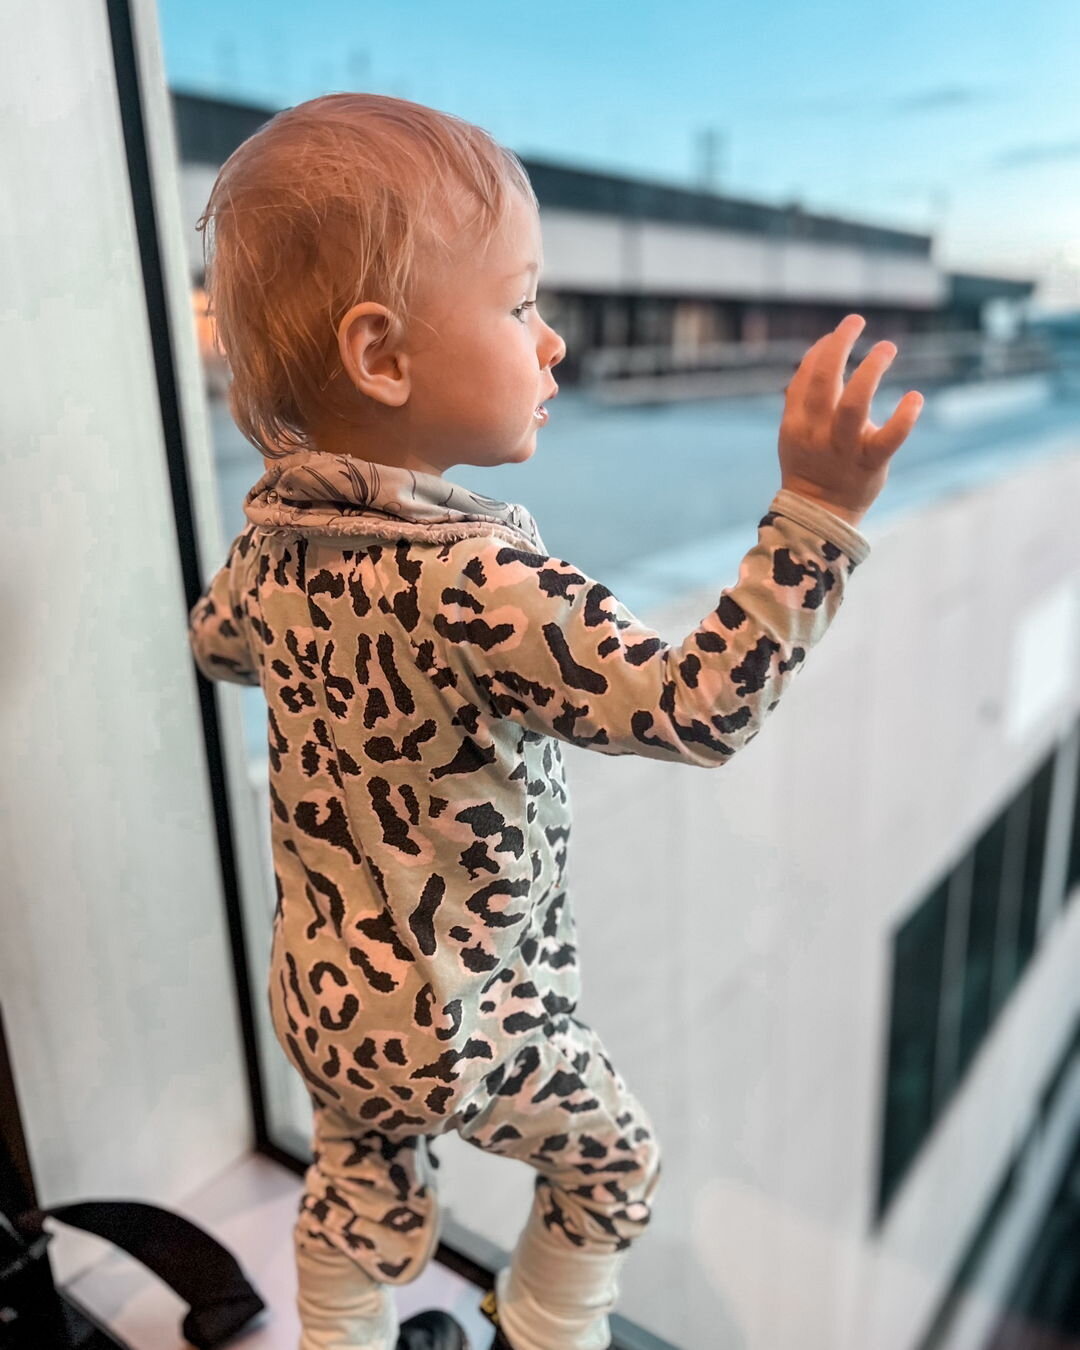 This little guy joined our Artistic Director Laura on every stop of our tour!

Being a working creative mama has been a privilege and at times a challenge, but Darcy has made it a joy!

And after 43 flights, naturally he&rsquo;s completely obsessed w